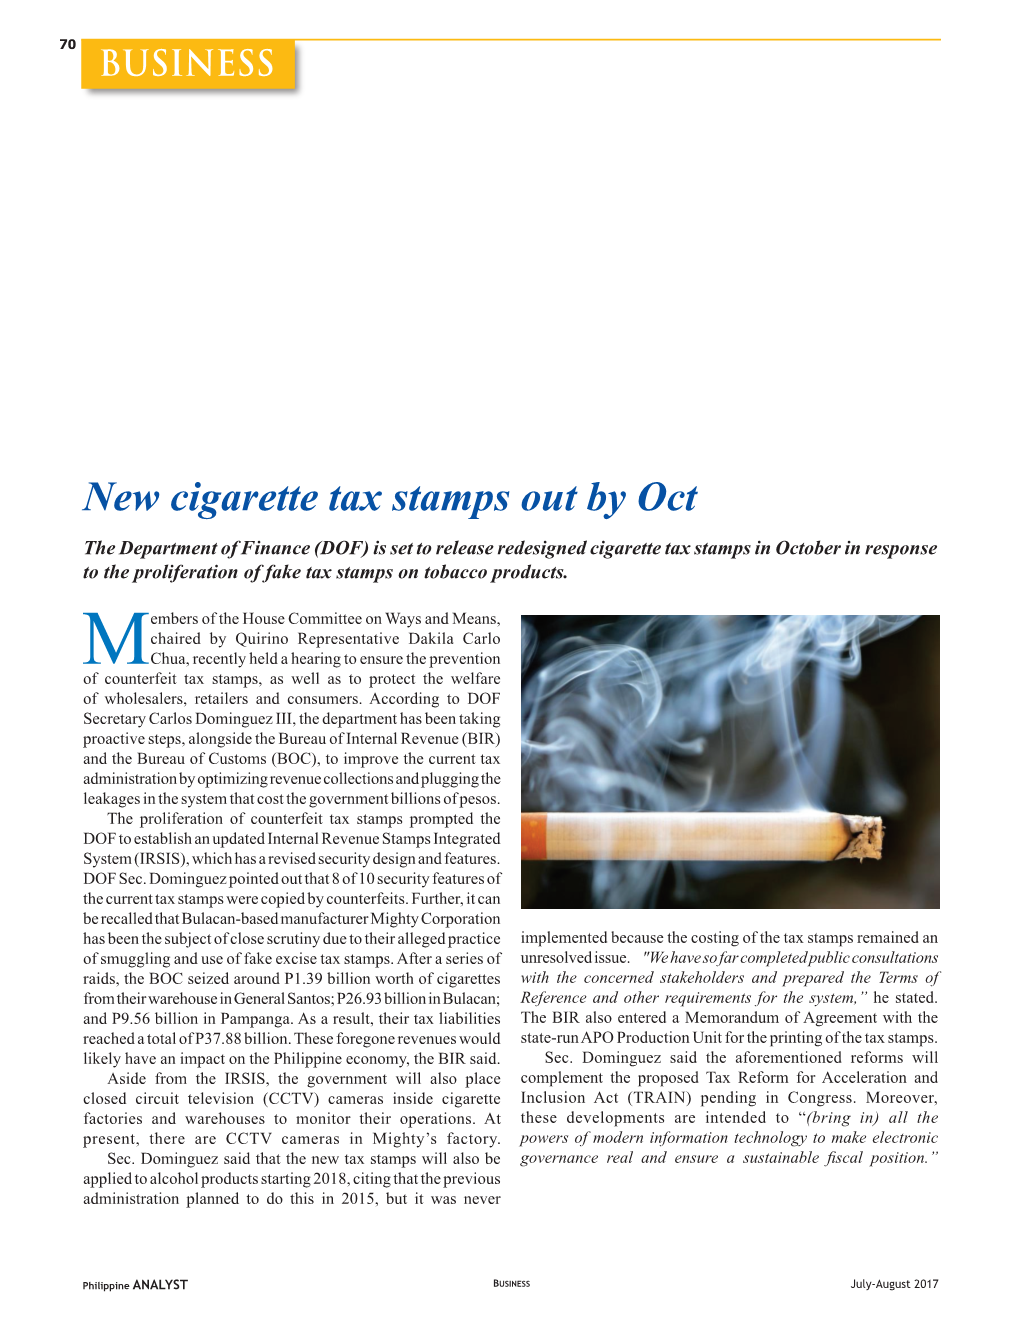 New Cigarette Tax Stamps out By